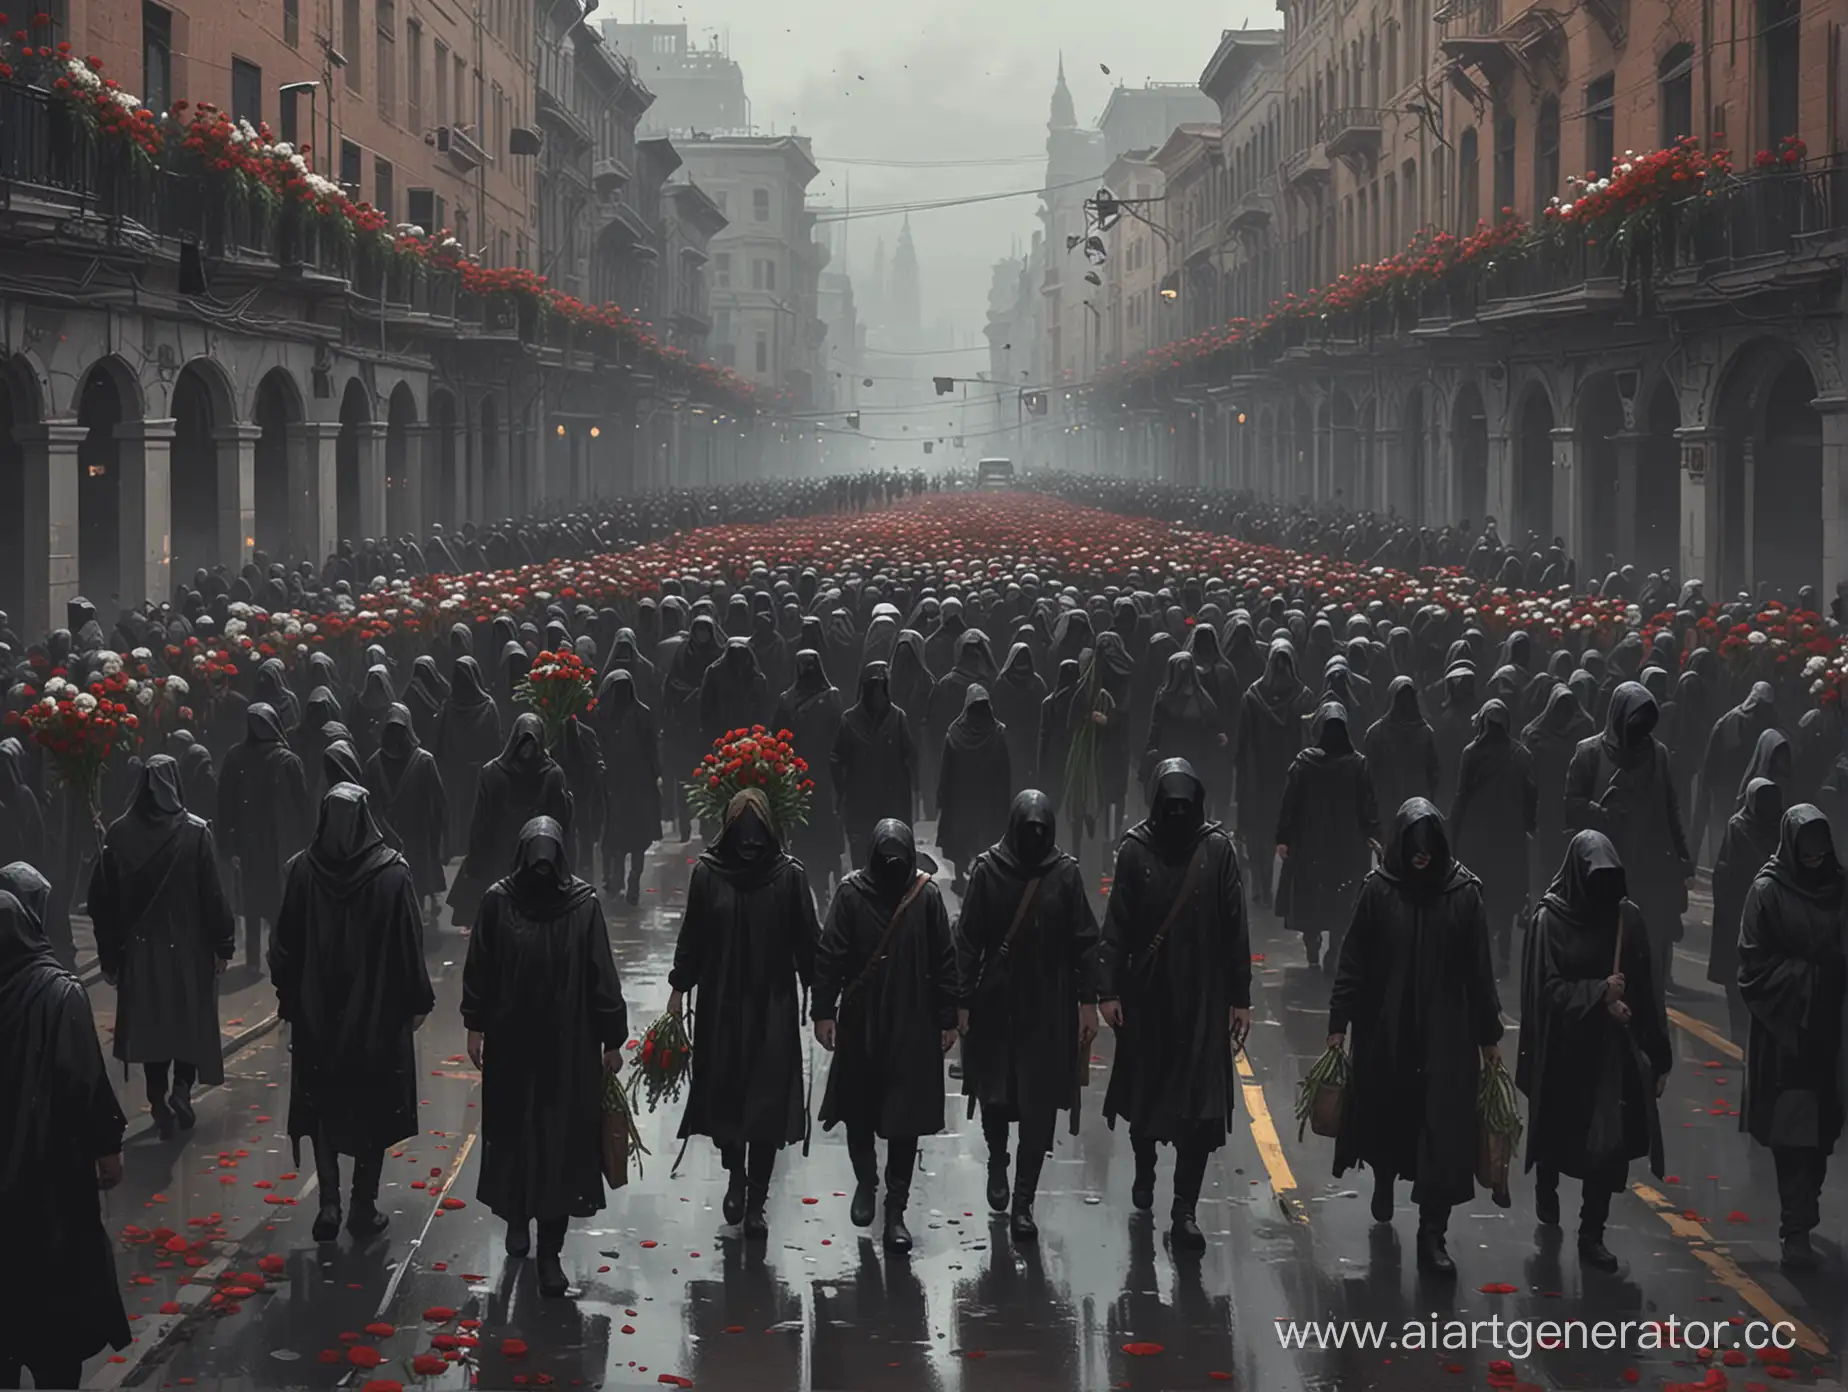 Mourners-Procession-in-Republican-City-Concept-Art-Depicting-Grieving-Figures-Bearing-Flowers